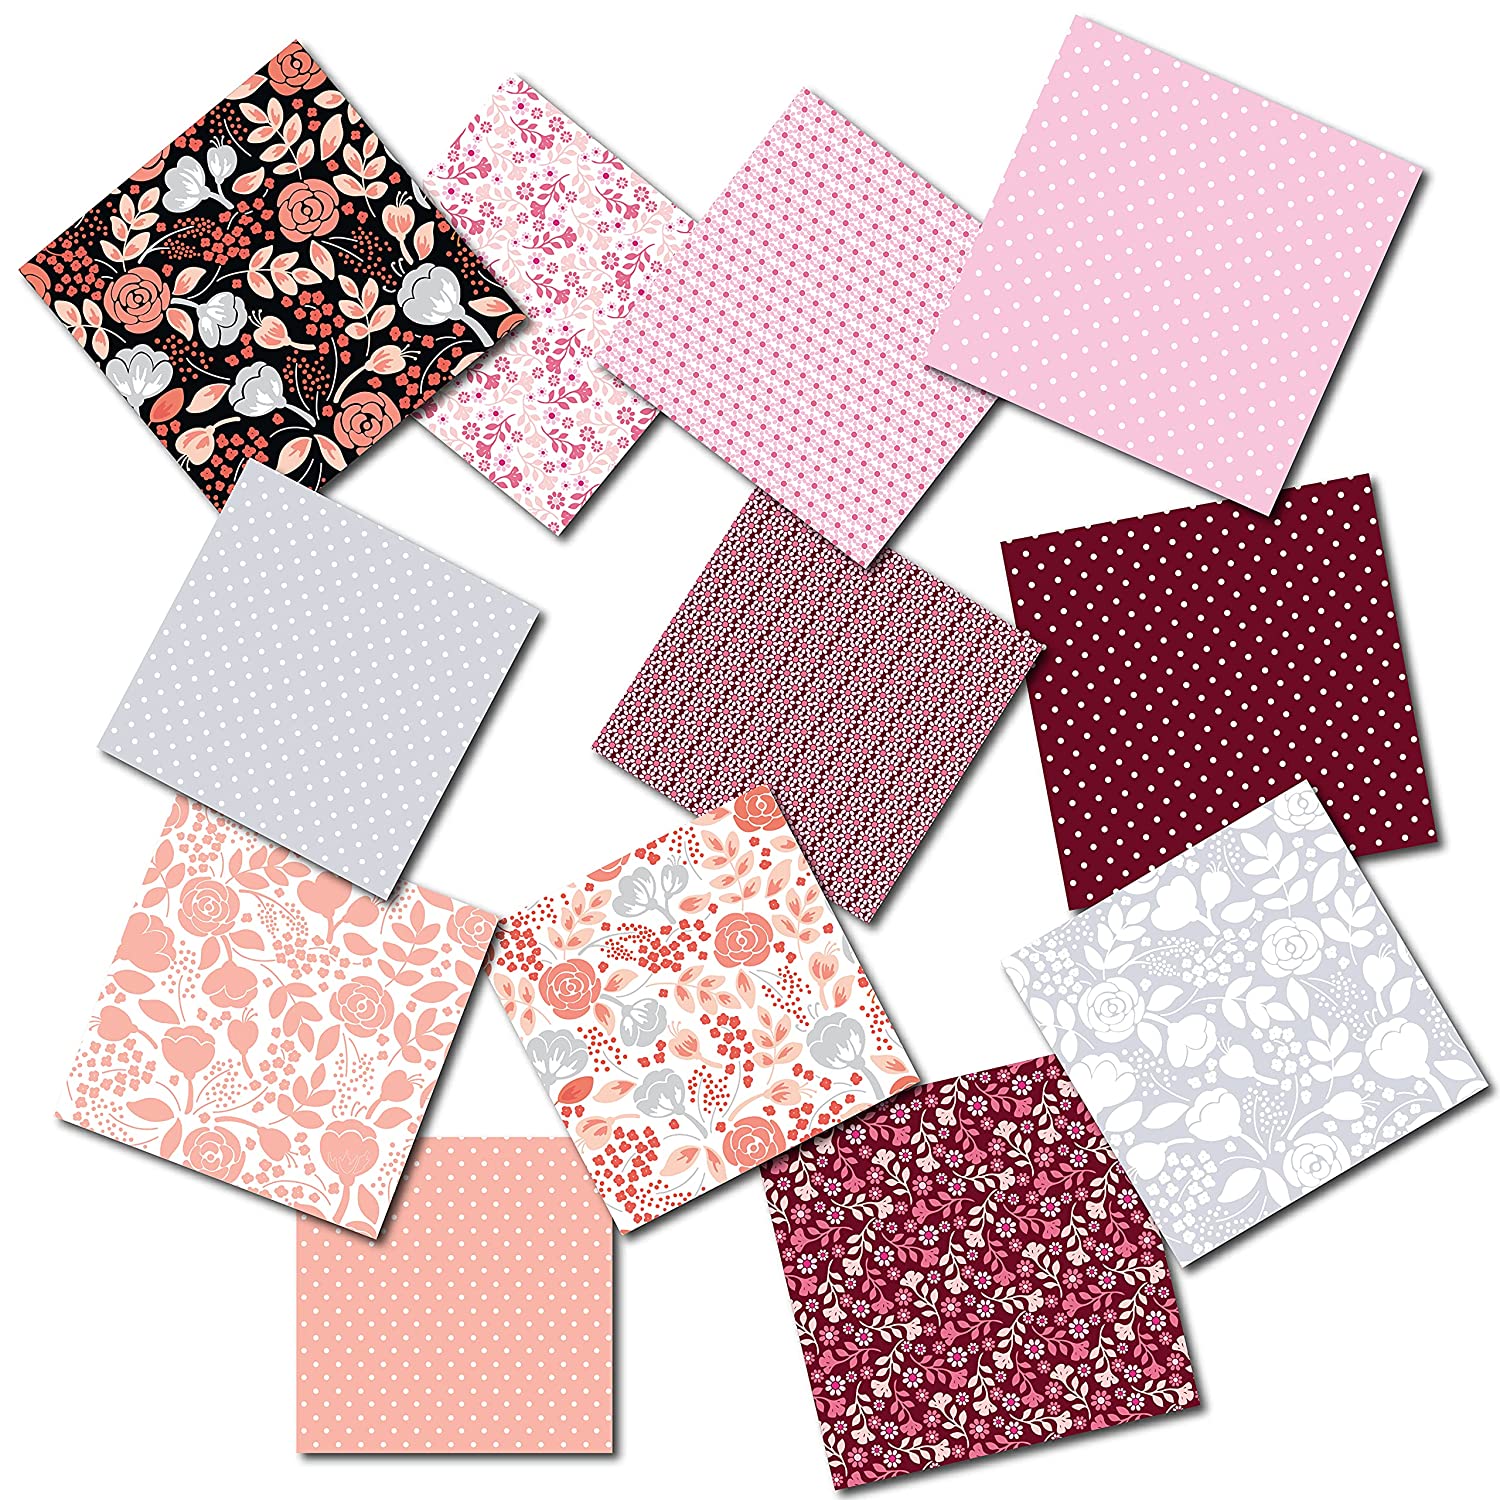 Lakeer A4 Printed Decorative Paper 80 GSM Thick Pack of 20 (10 Designs X 2  pcs Each) Sheets Printed for Origami, Scrapbooking, Hobby Crafts, Project  Work, etc. : Amazon.in: Office Products